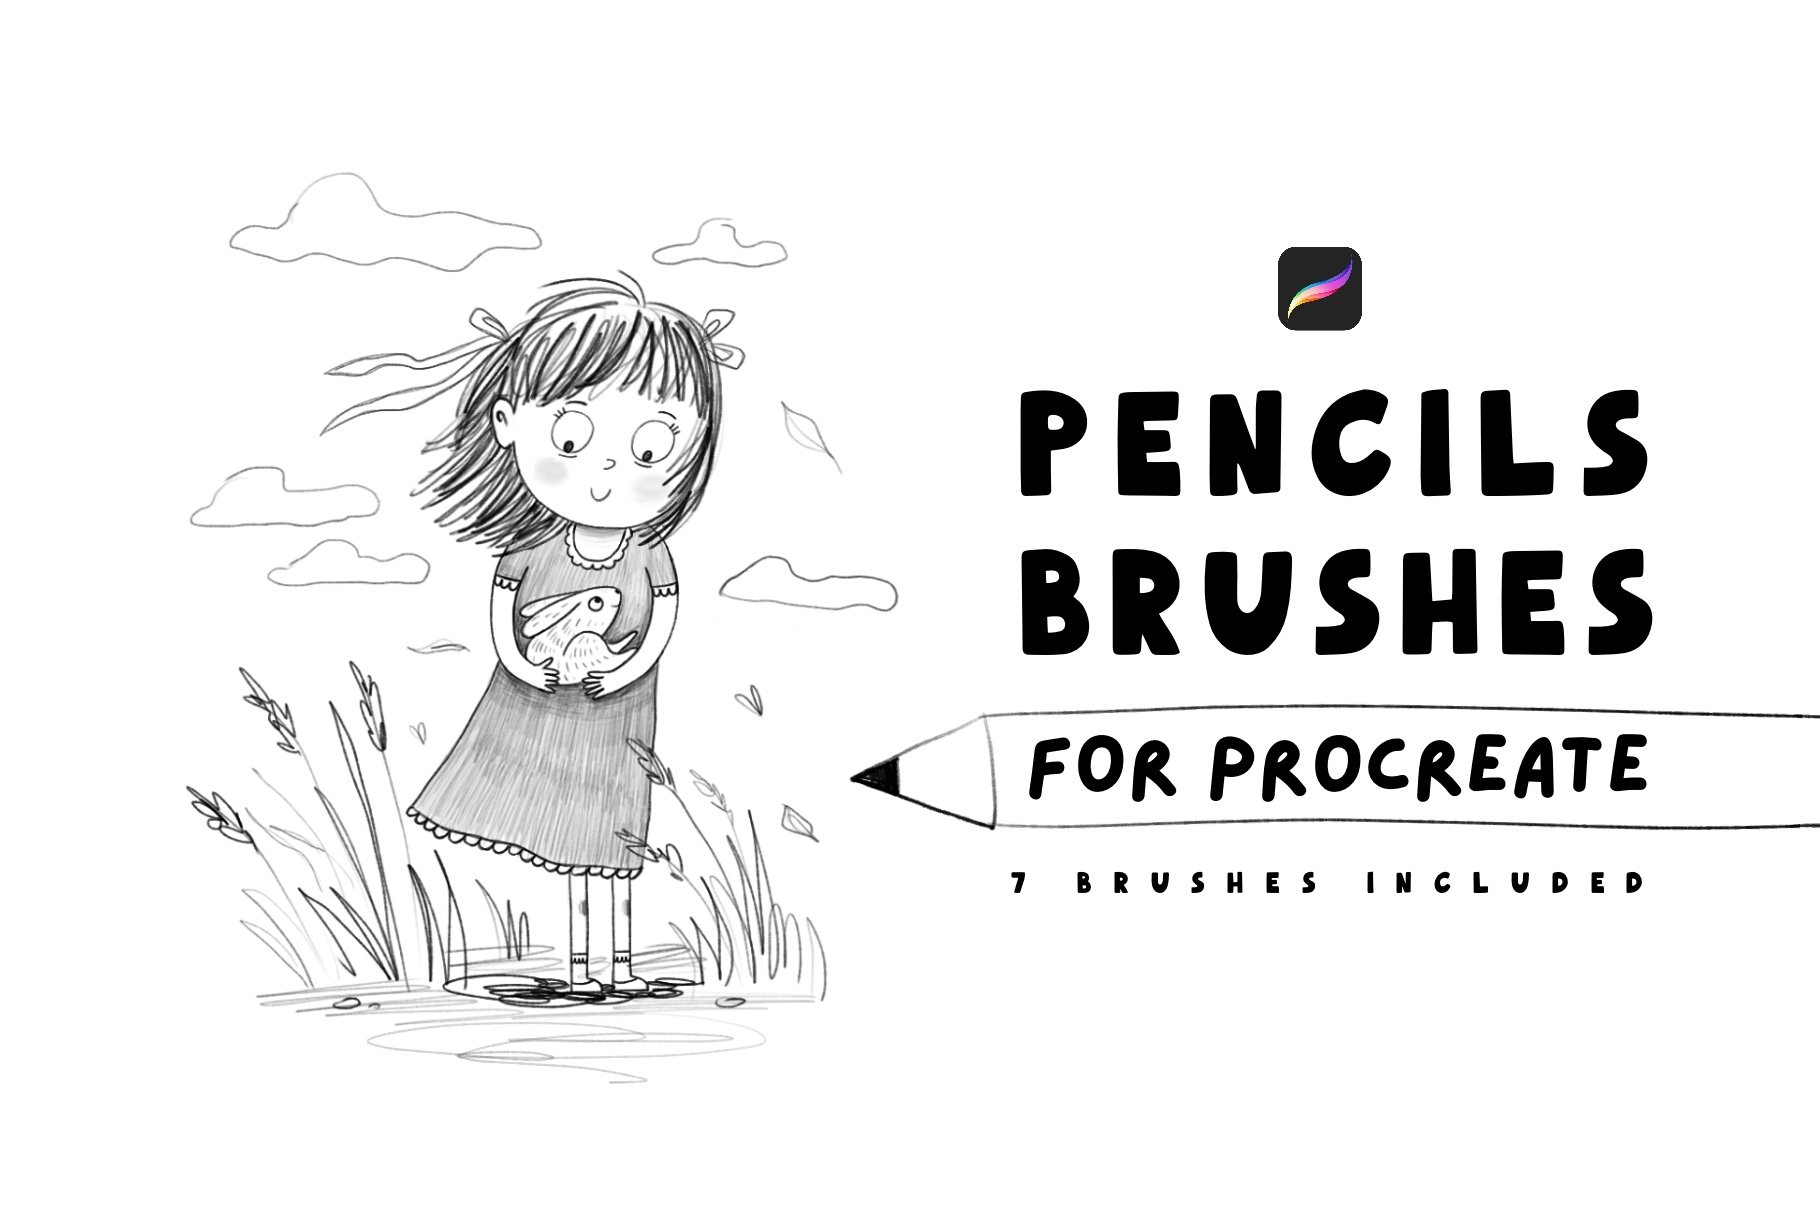 Procreate Brushes: How to Find, Use, and Create Your Own | Skillshare Blog